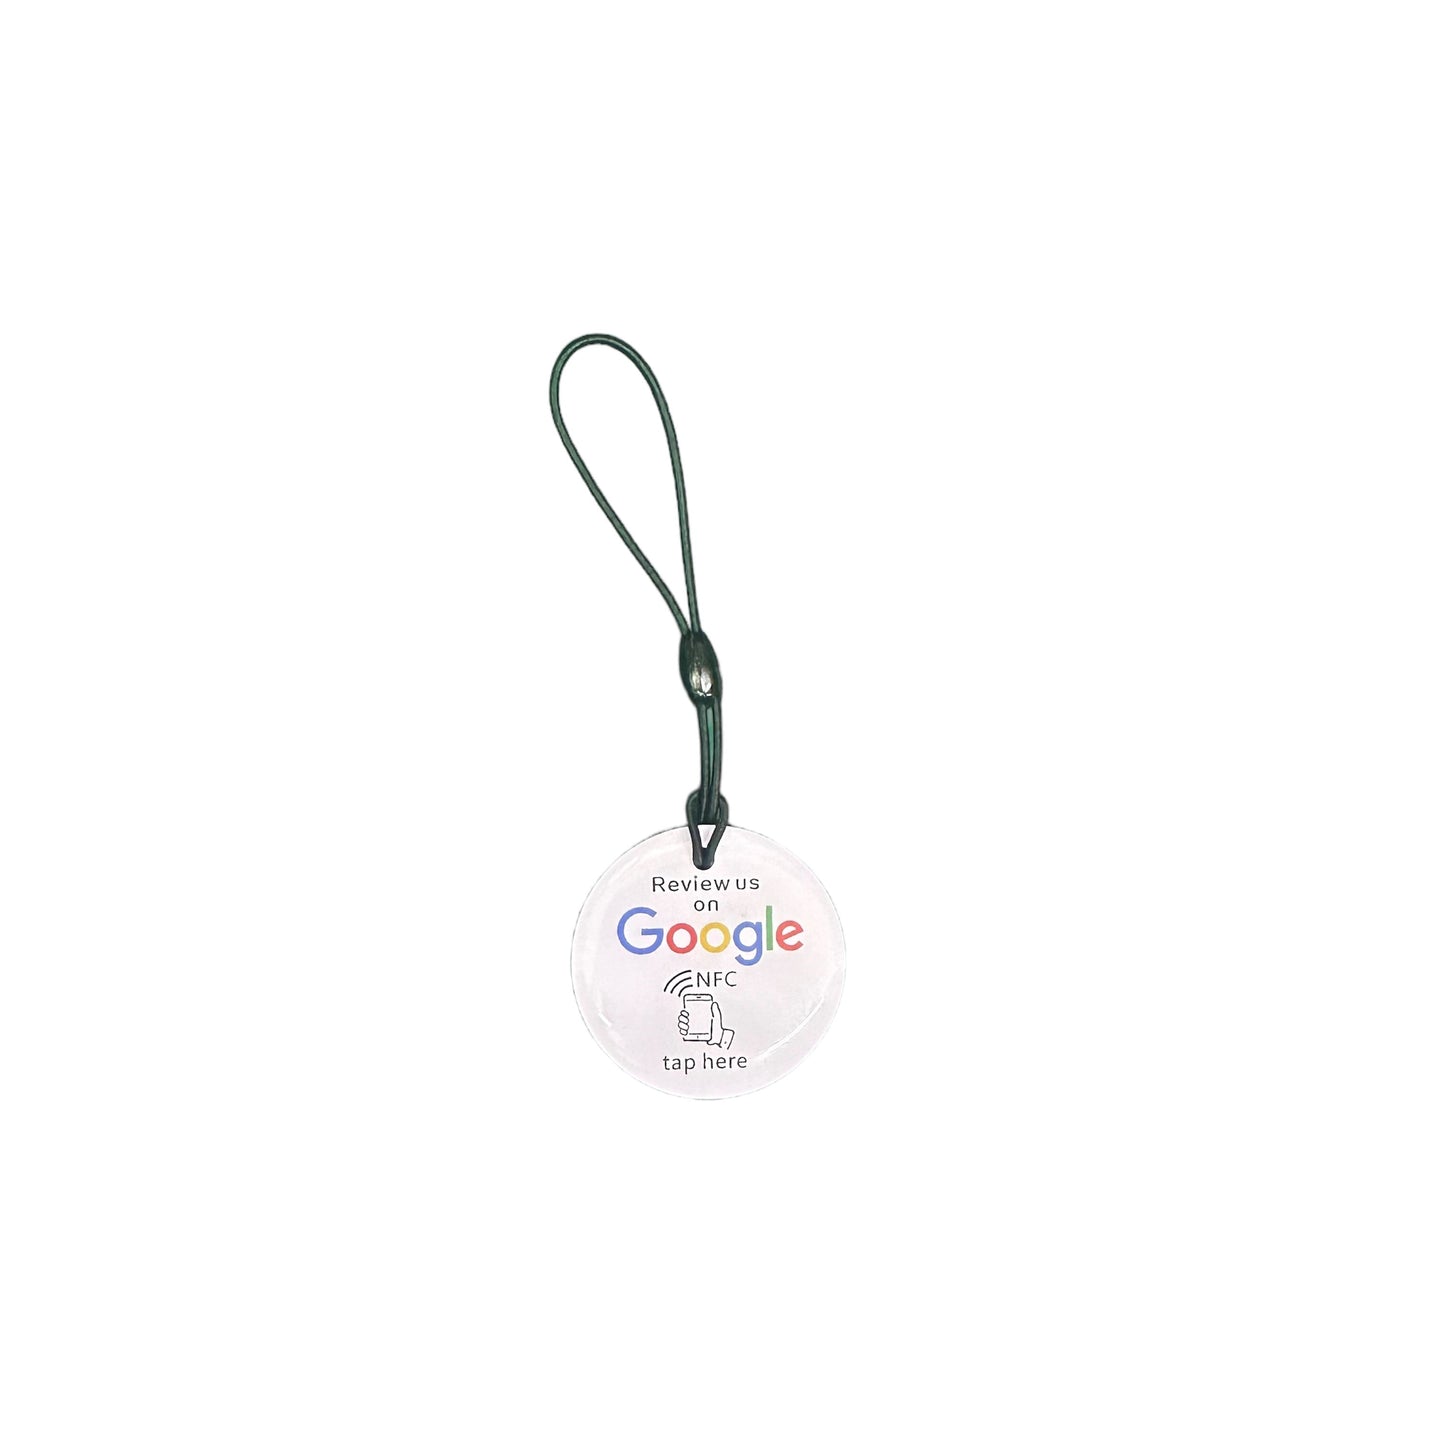 Tap and Share  Contactless Sharing Smart NFC 2x 'Review us on Google' Review Keyrings + QR code